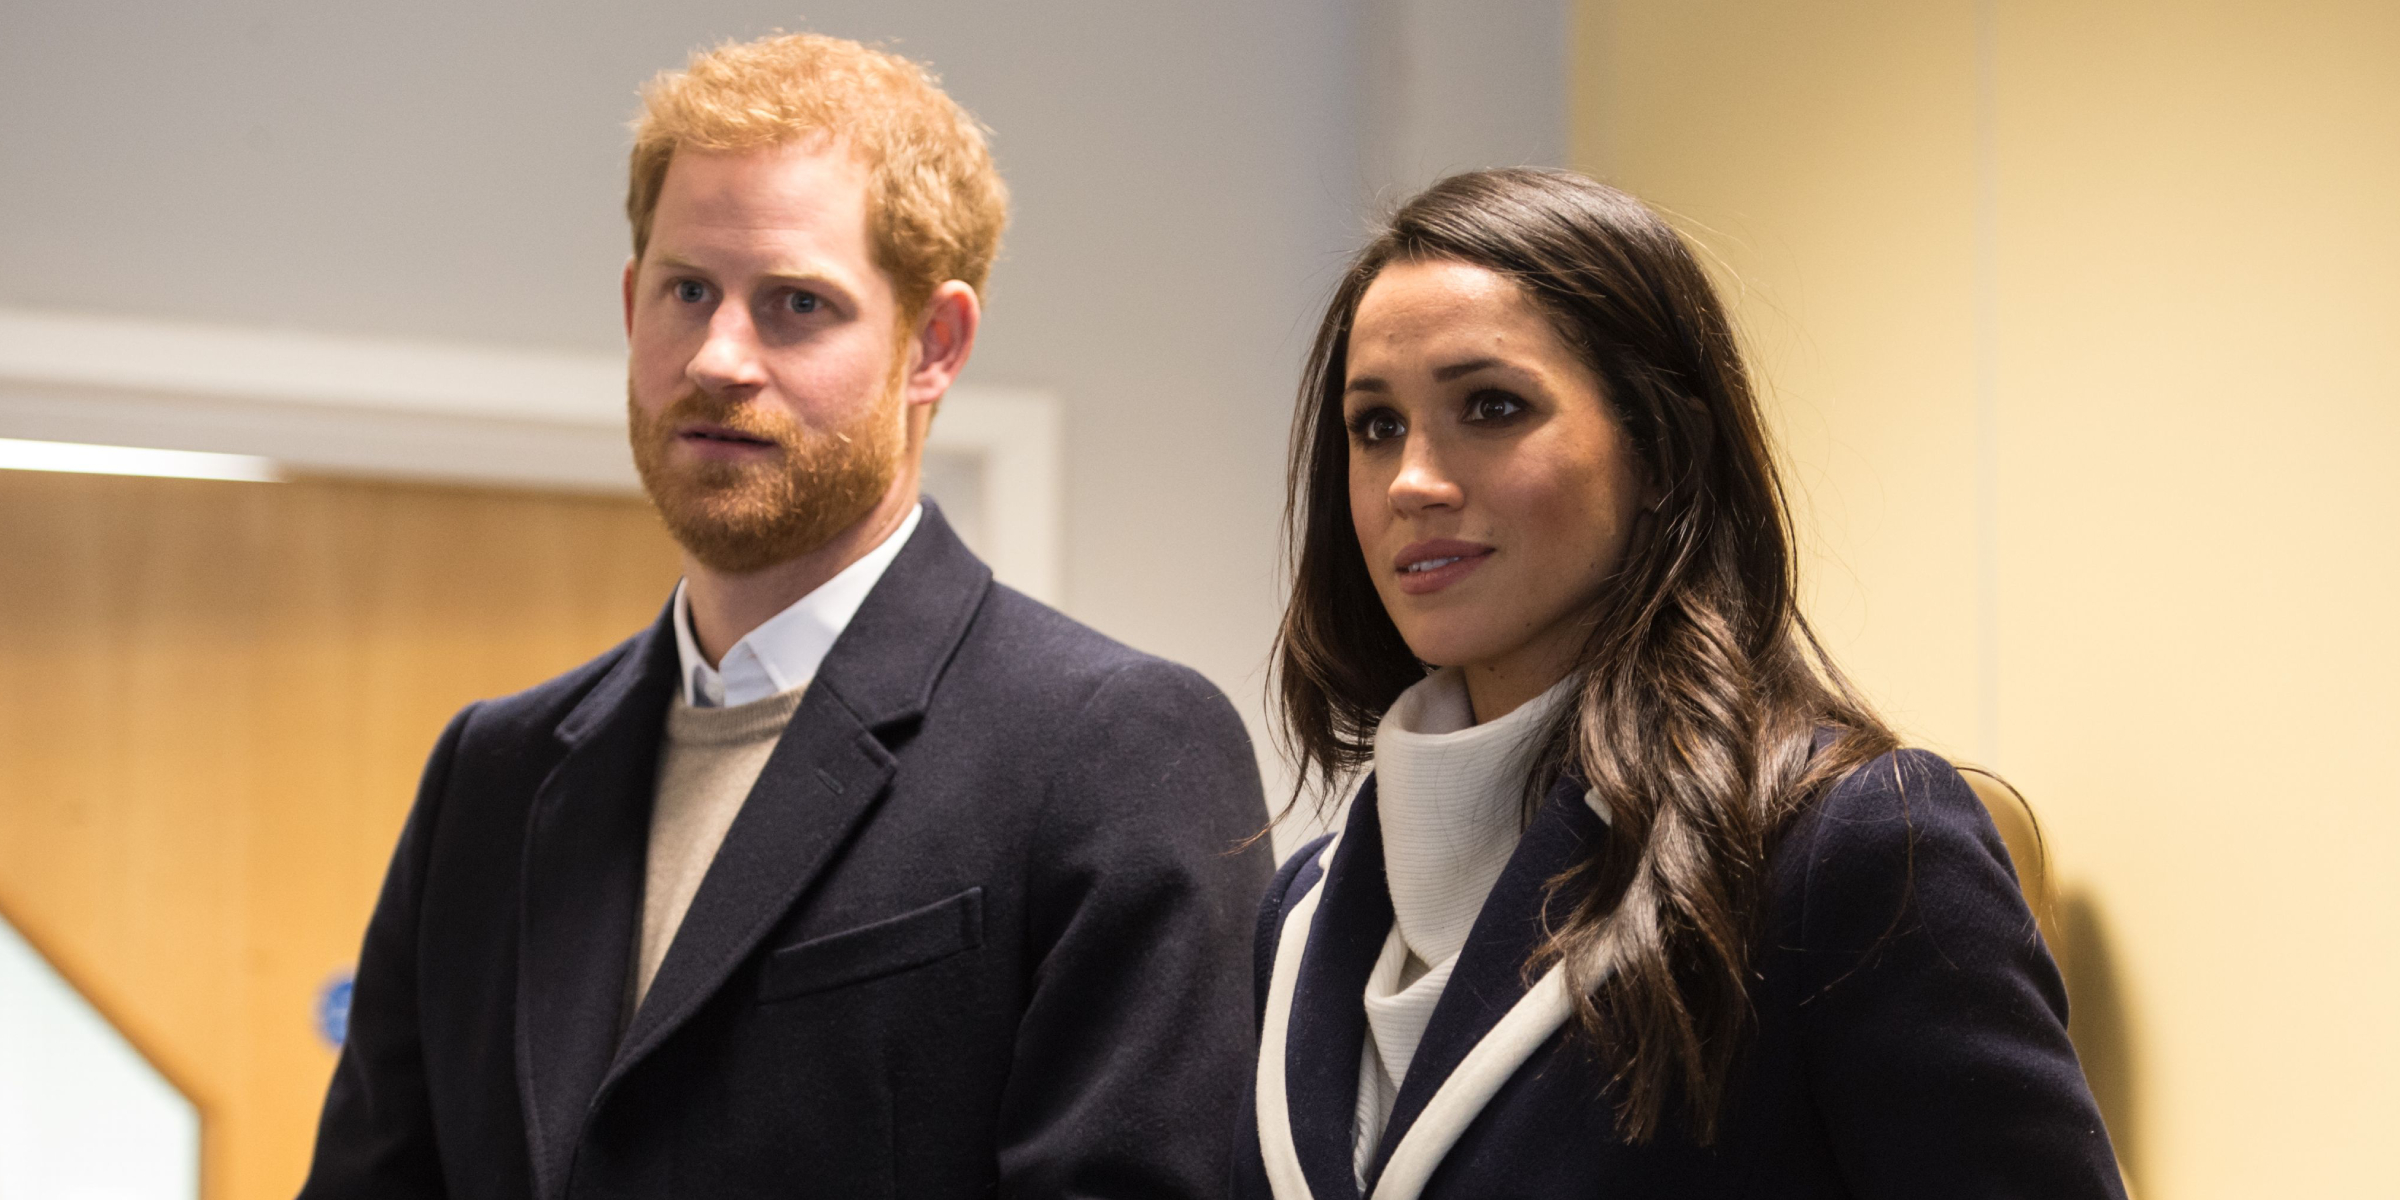 Prince Harry and Meghan Markle | Source: Getty Images